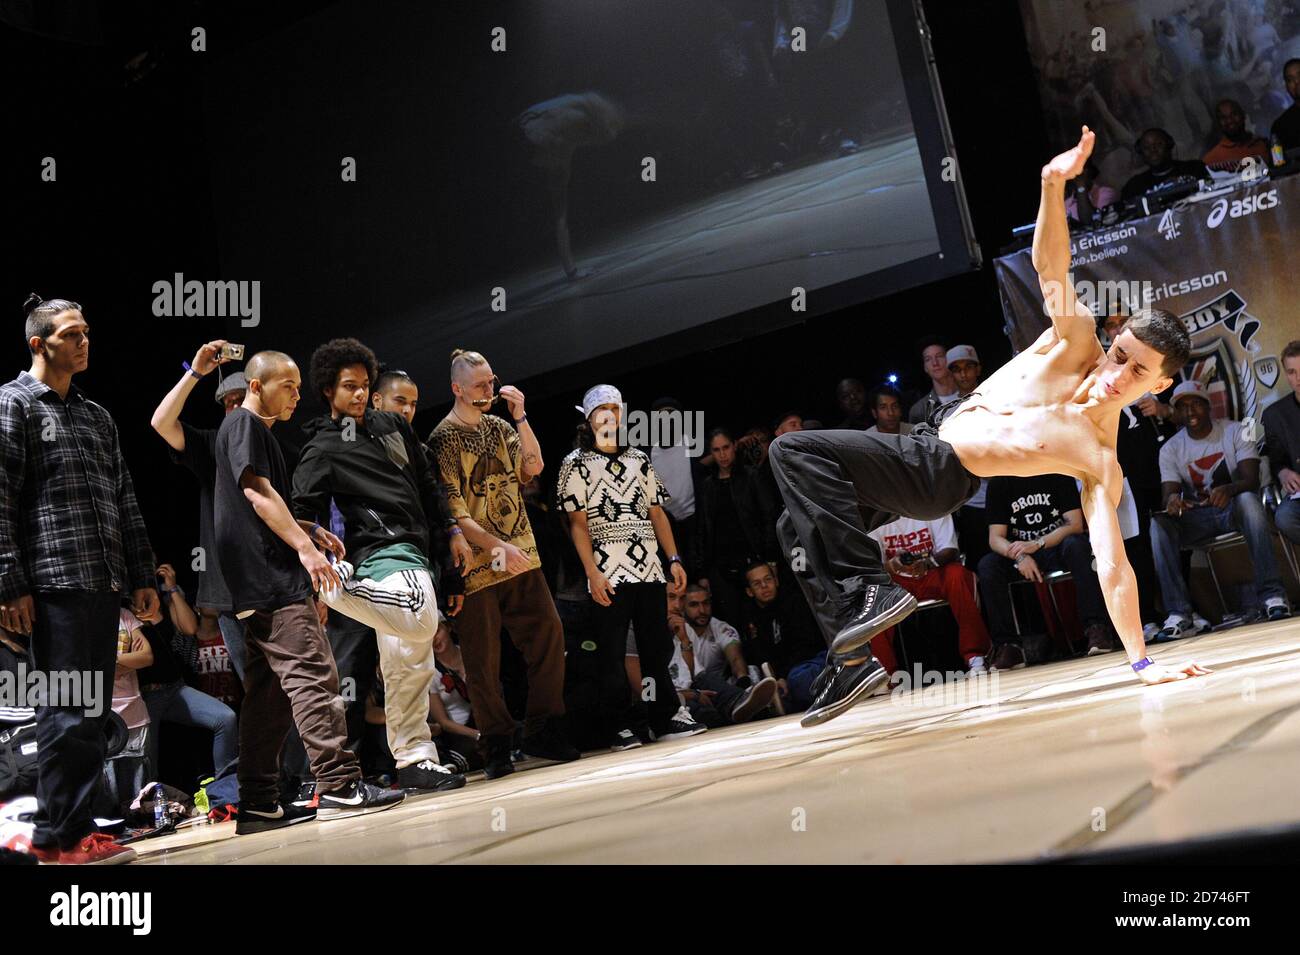 B-Boys compete at the Sony Ericsson B-Boy Championships, at the Brixton Academy in south London. Stock Photo